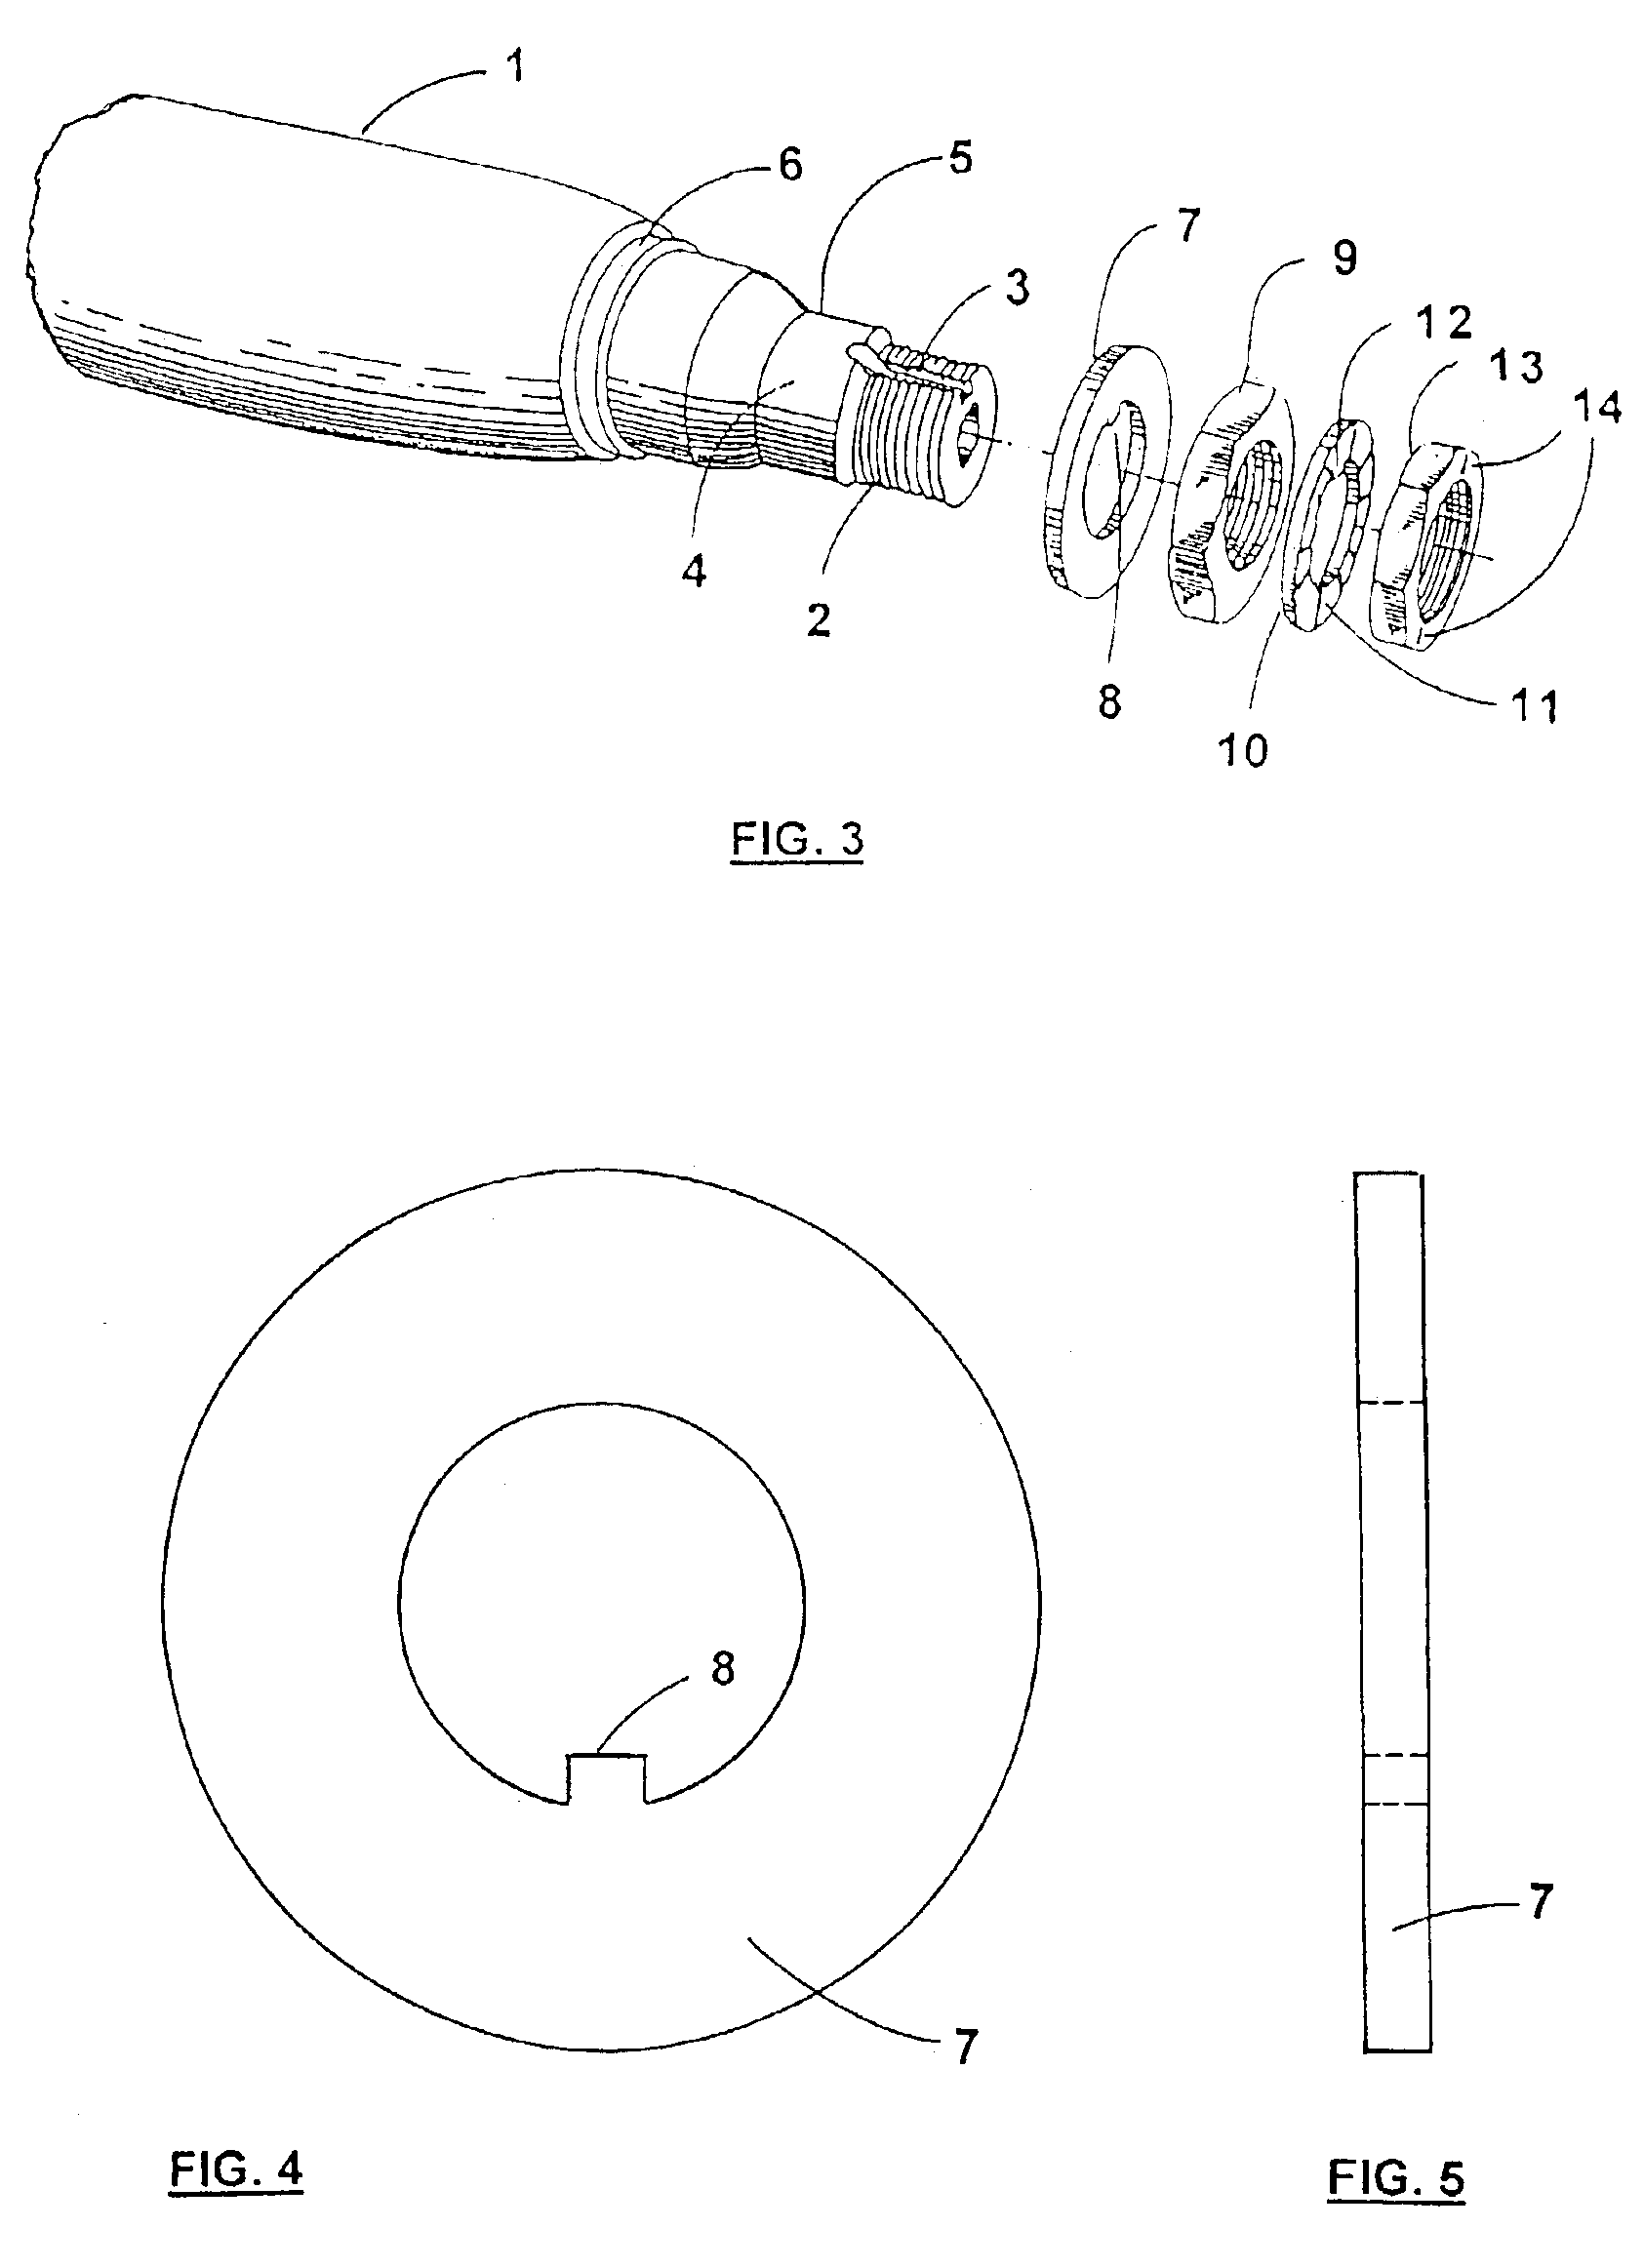 High-integrity interlocking nut and washer system